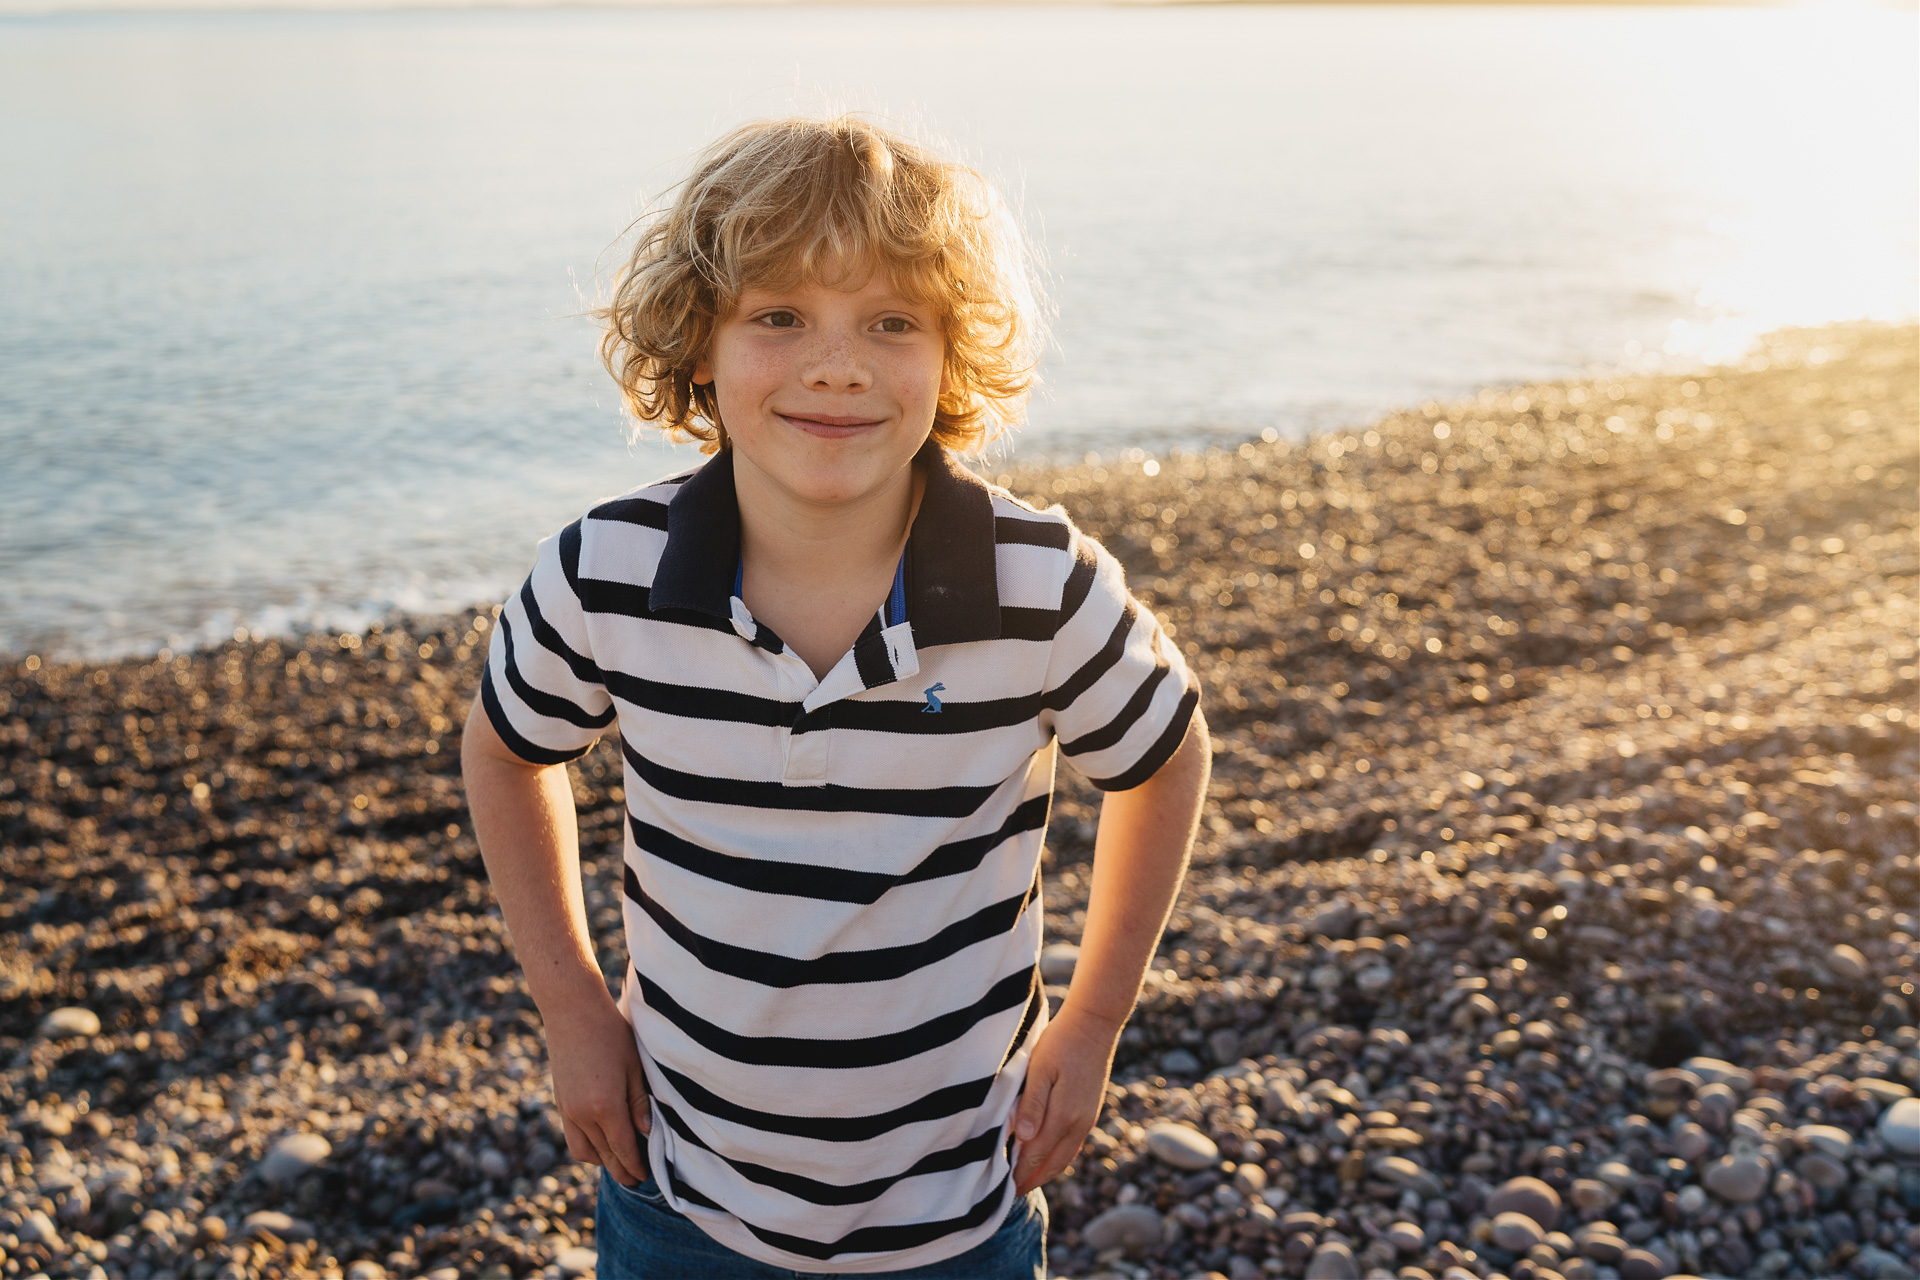 A young boy on a beach with the sun setting behind